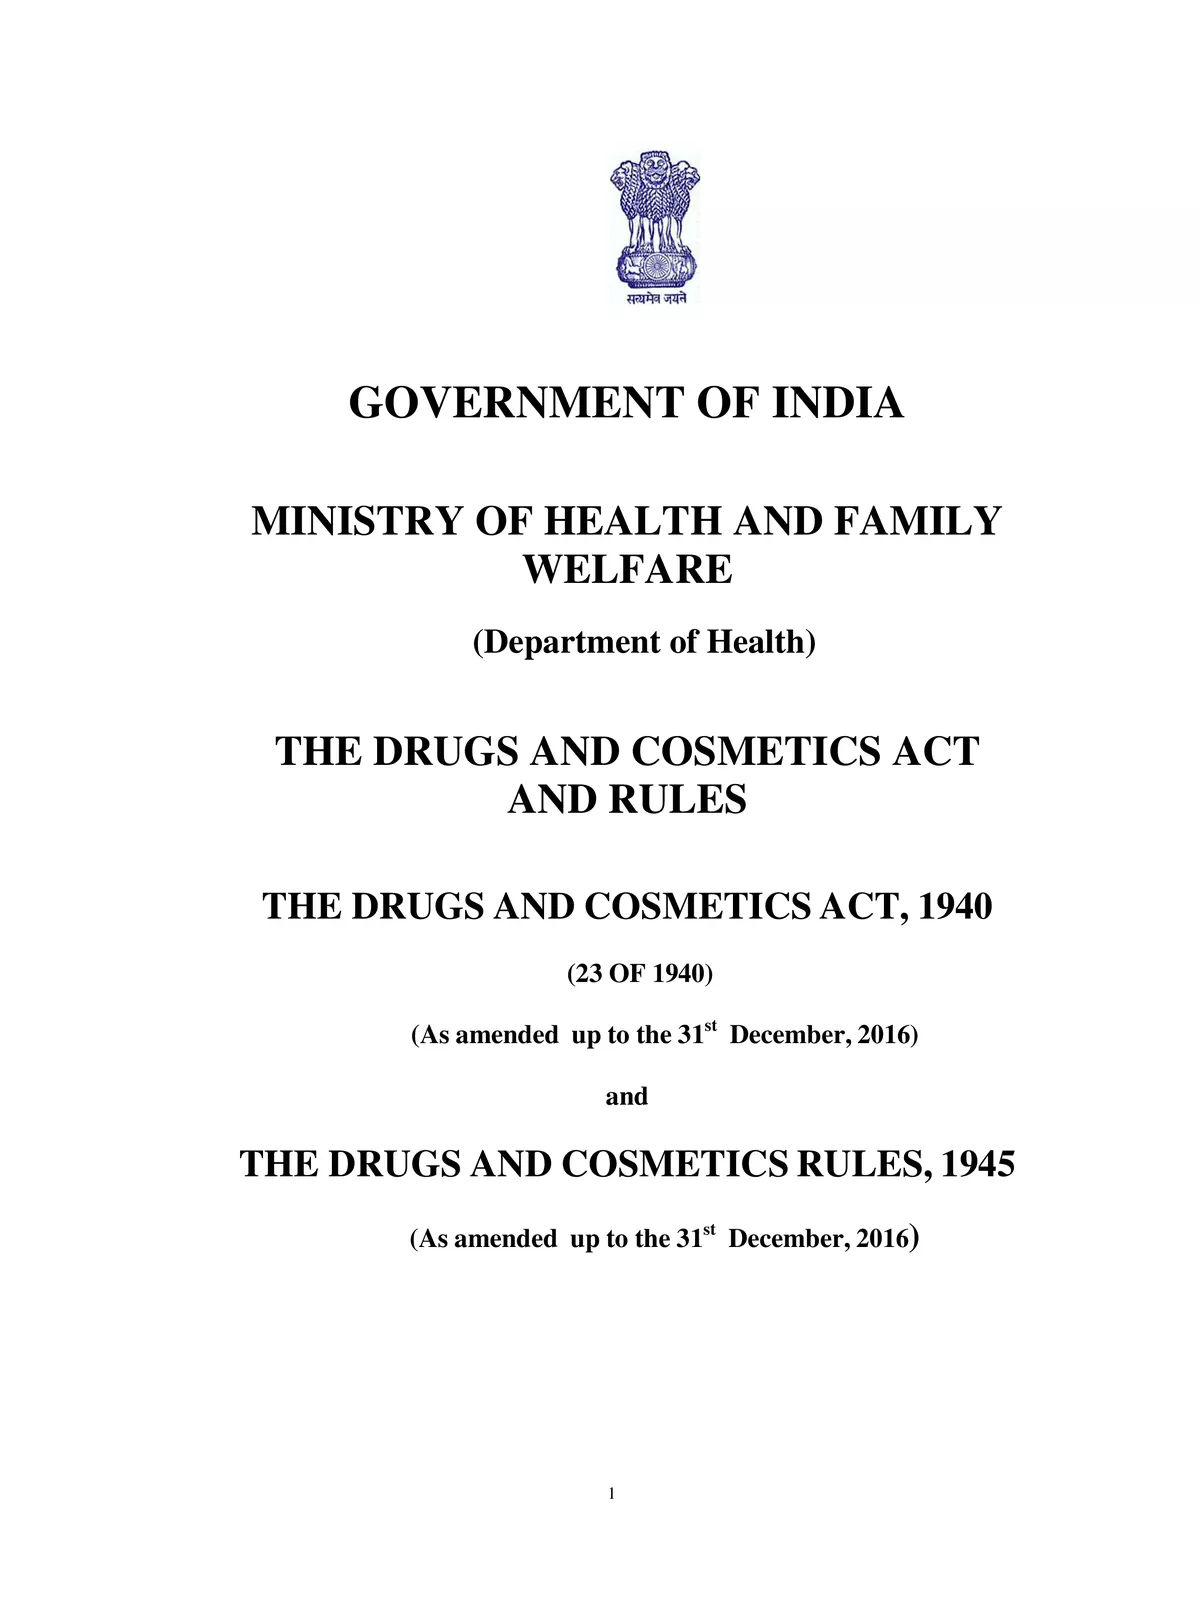 Drugs and Cosmetic Act 1940